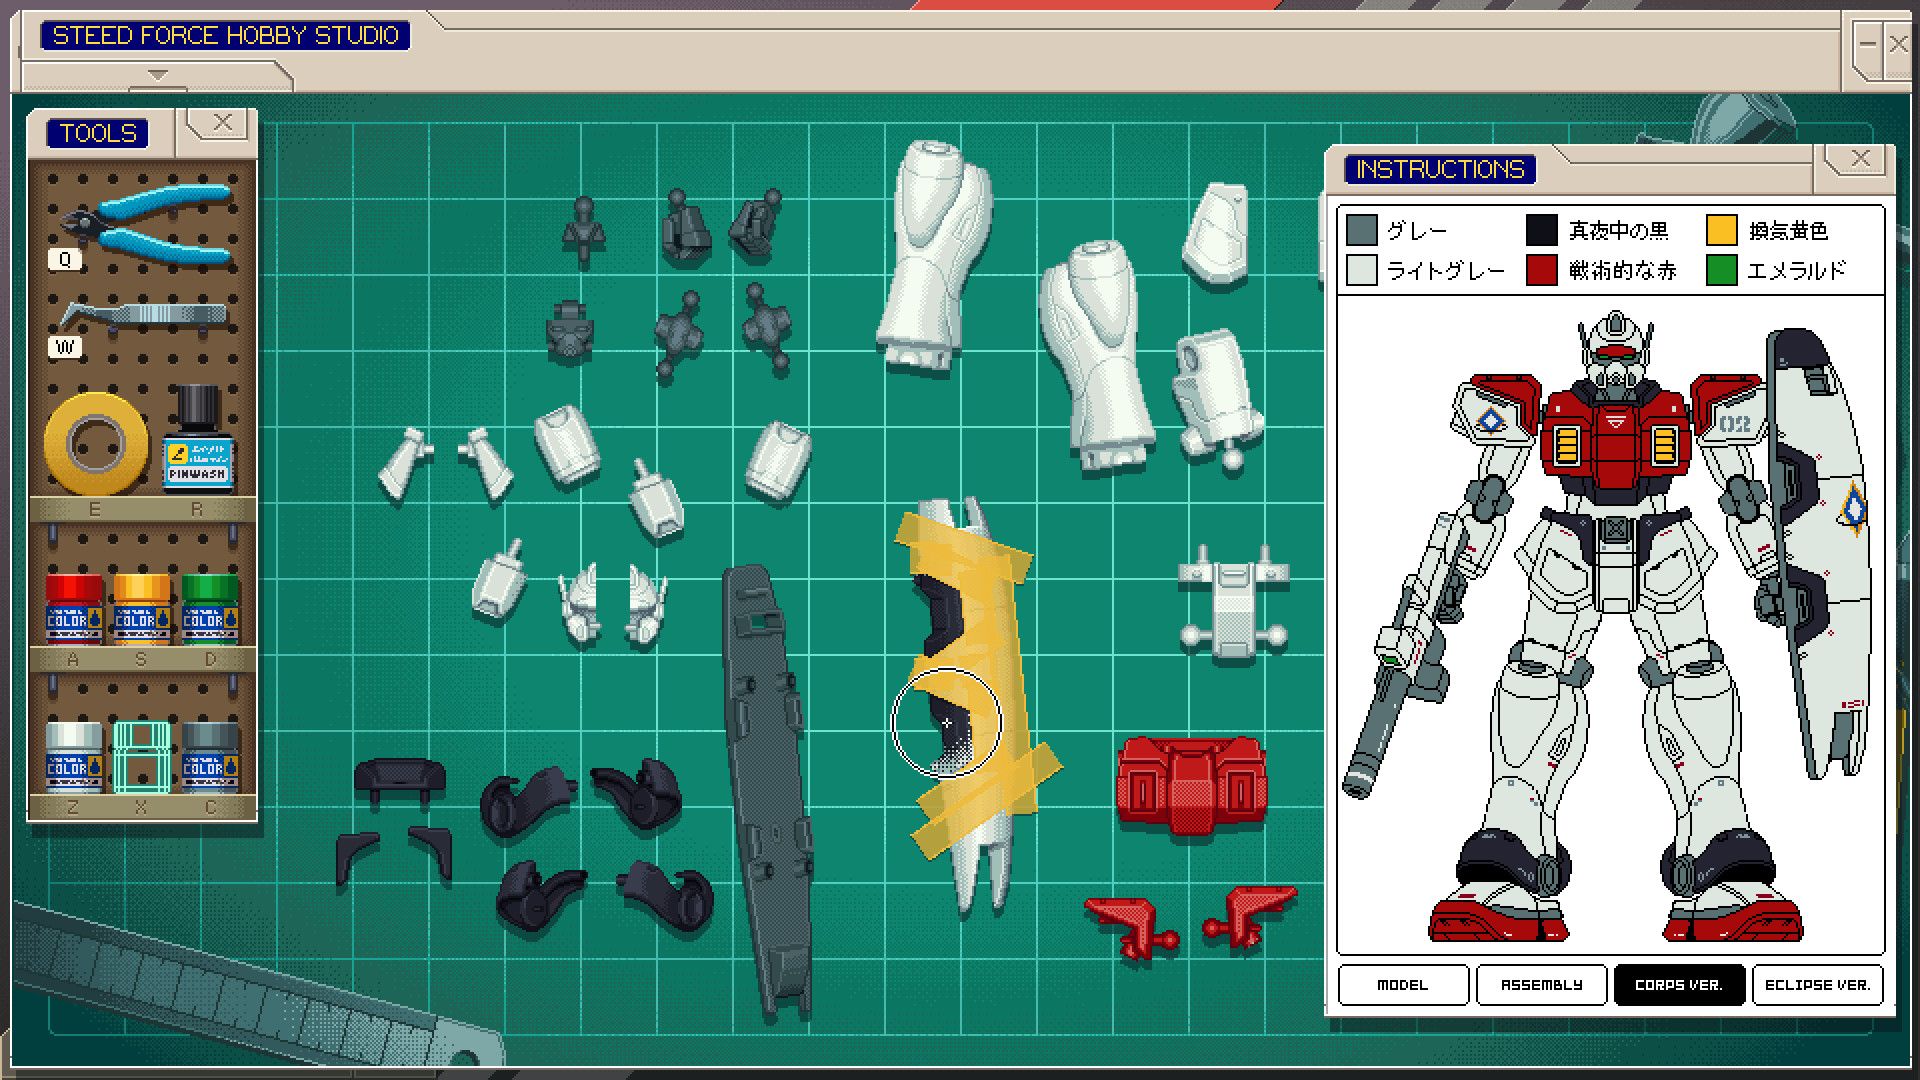 Video game screenshot of a puzzle game involving assembling plastic parts to make a robot action figure